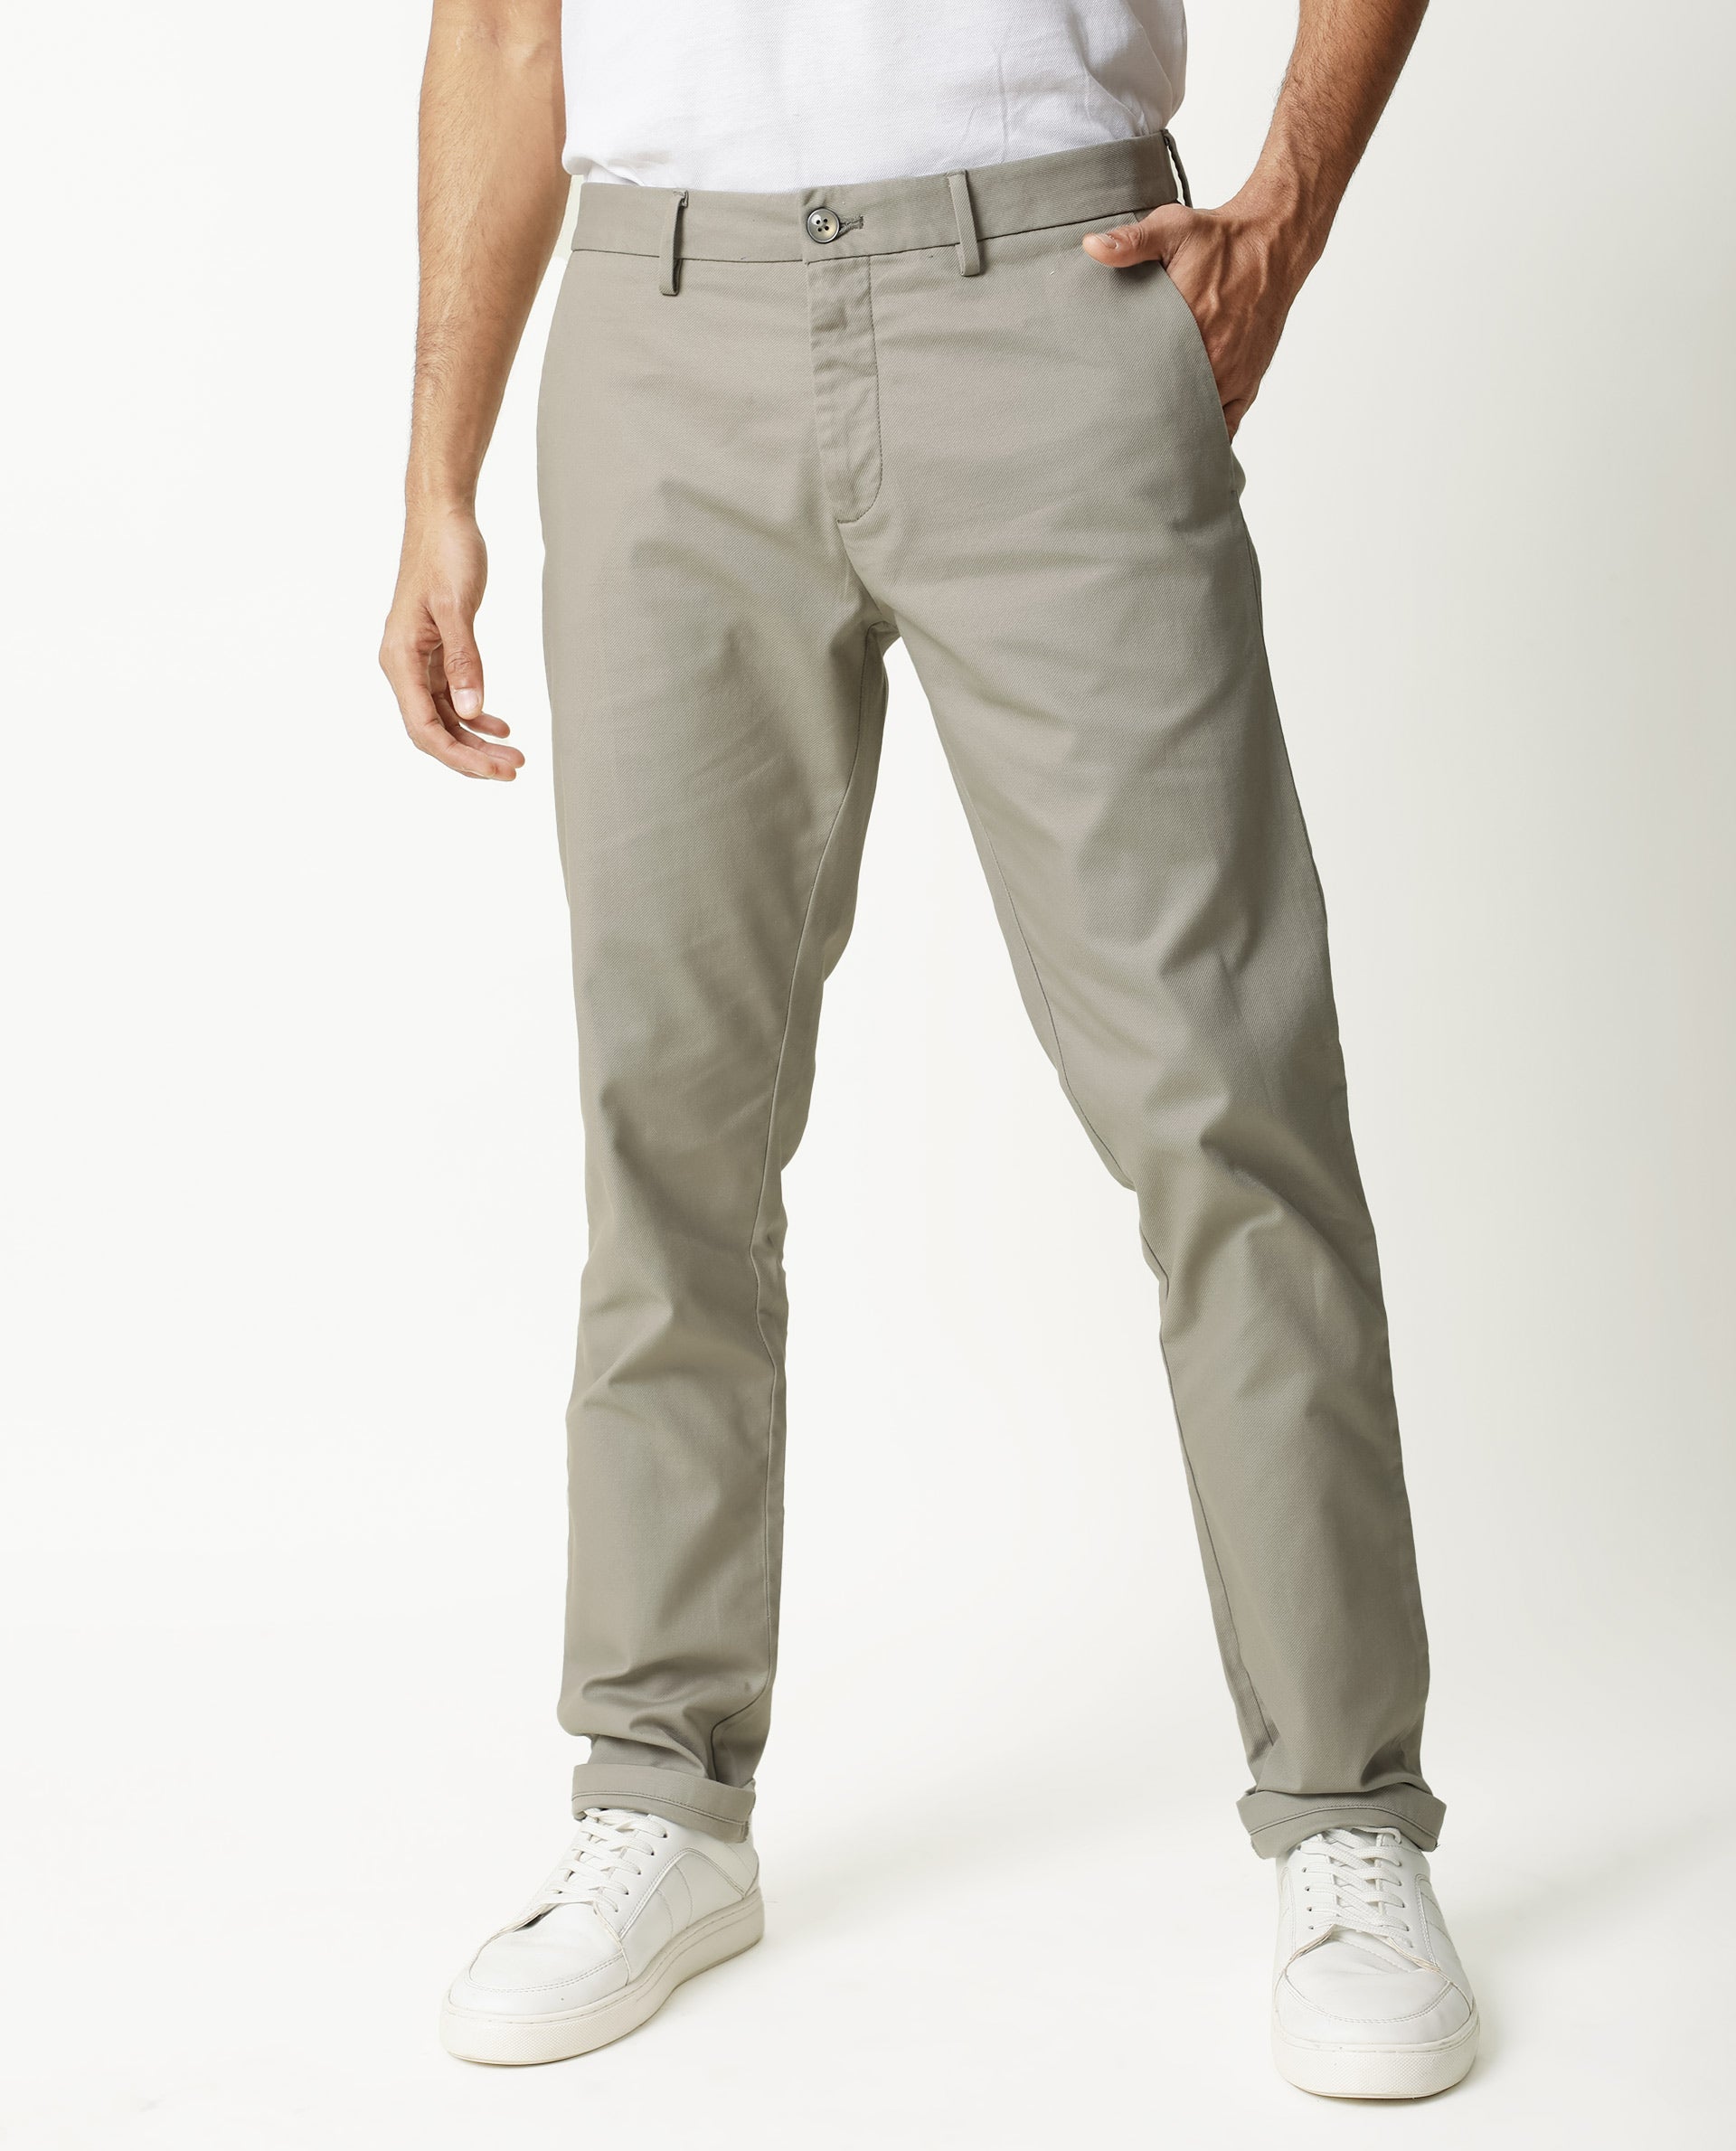 BASICS TAPERED FIT PUMICE STONE COTTON TROUSER17BCTR38208 freeshipping   BasicsLife